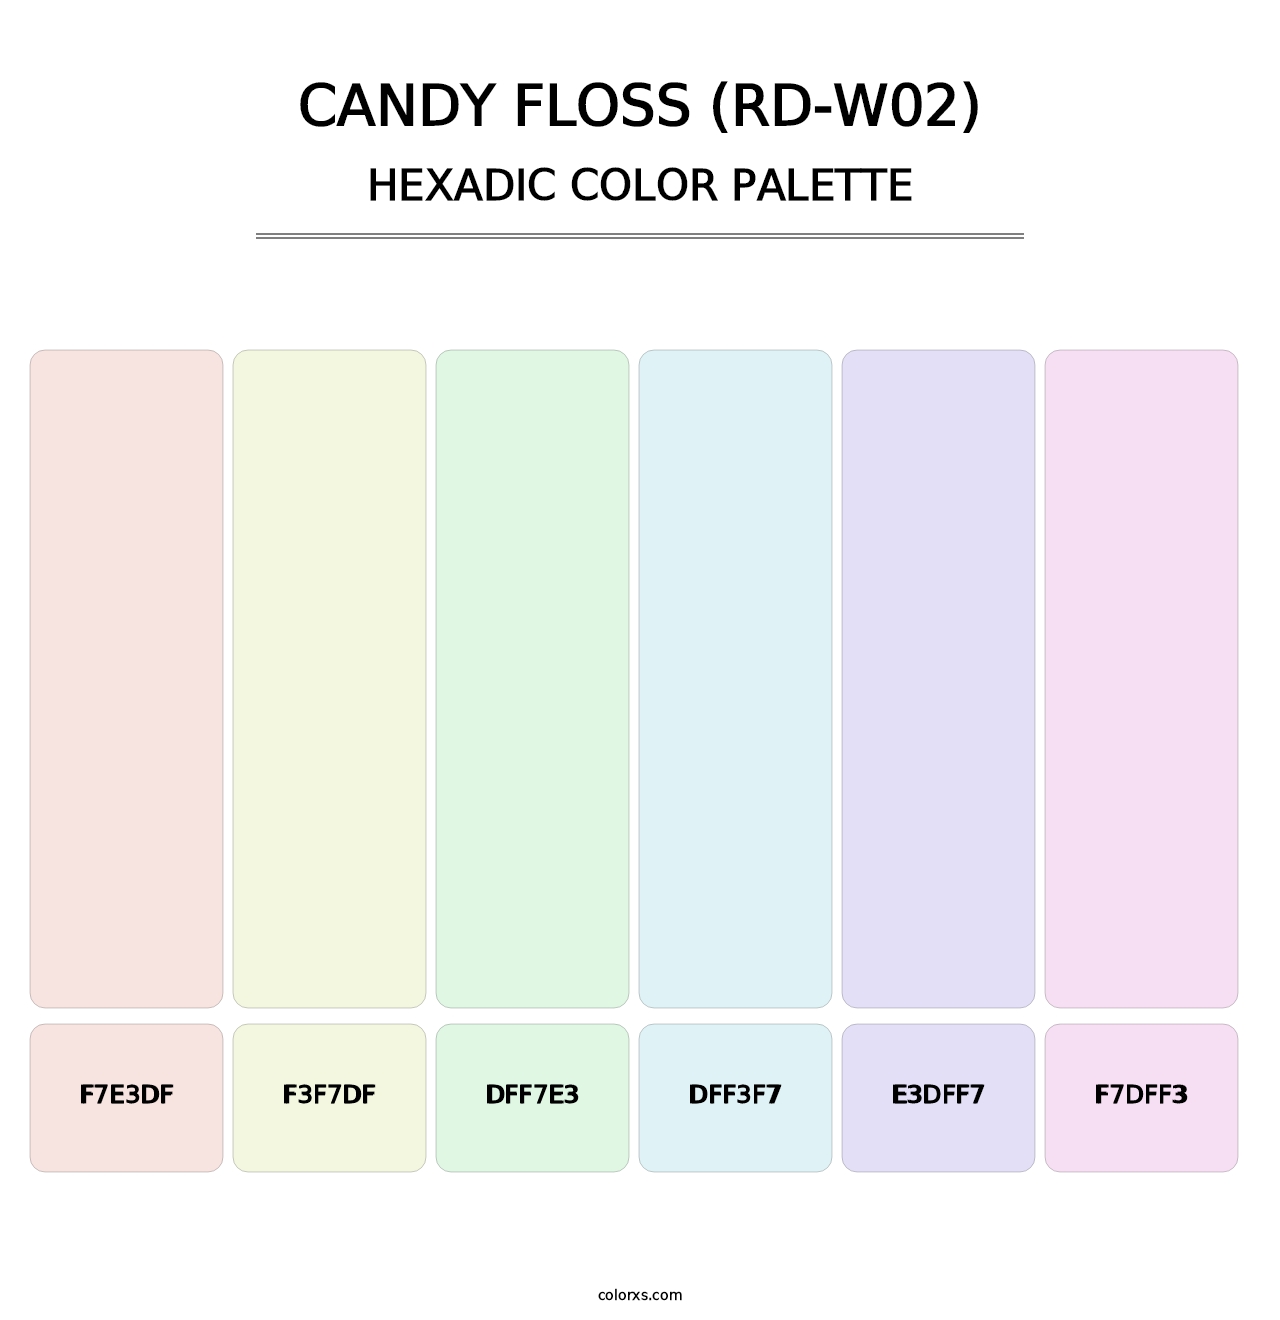 Candy Floss (RD-W02) - Hexadic Color Palette